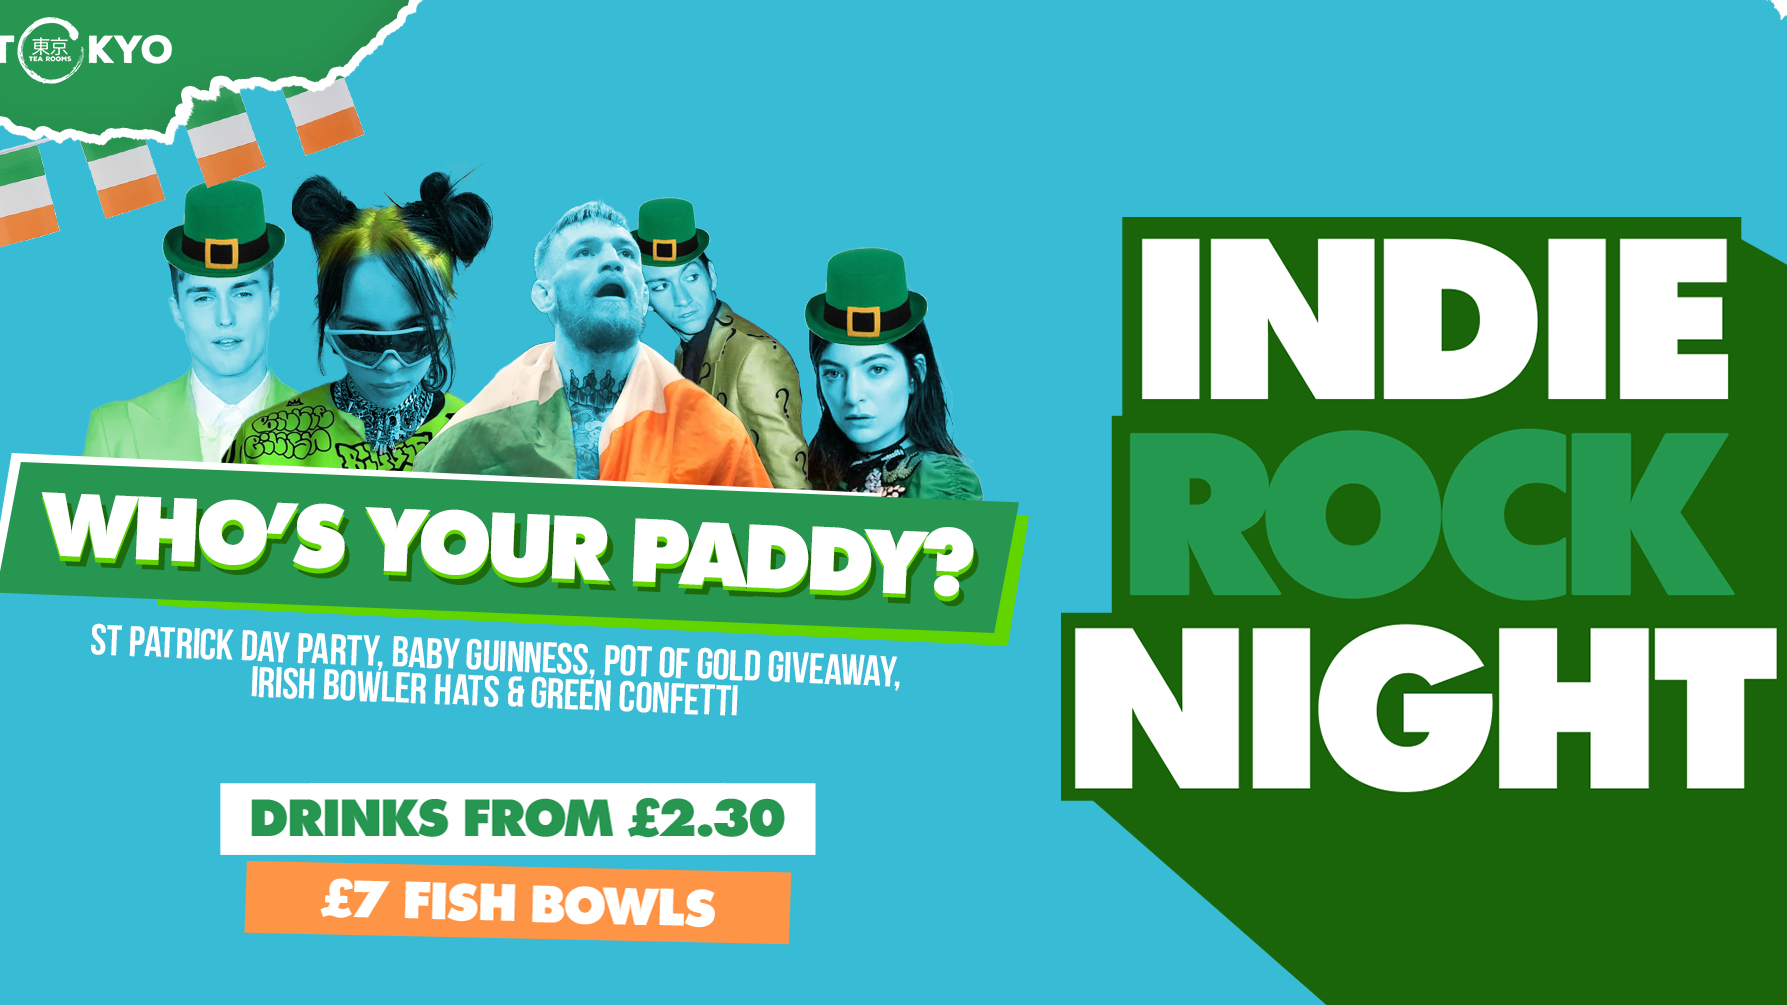 Indie Rock Night ∙ WHO’S YOUR PADDY *ONLY 8 £2 TICKETS LEFT*